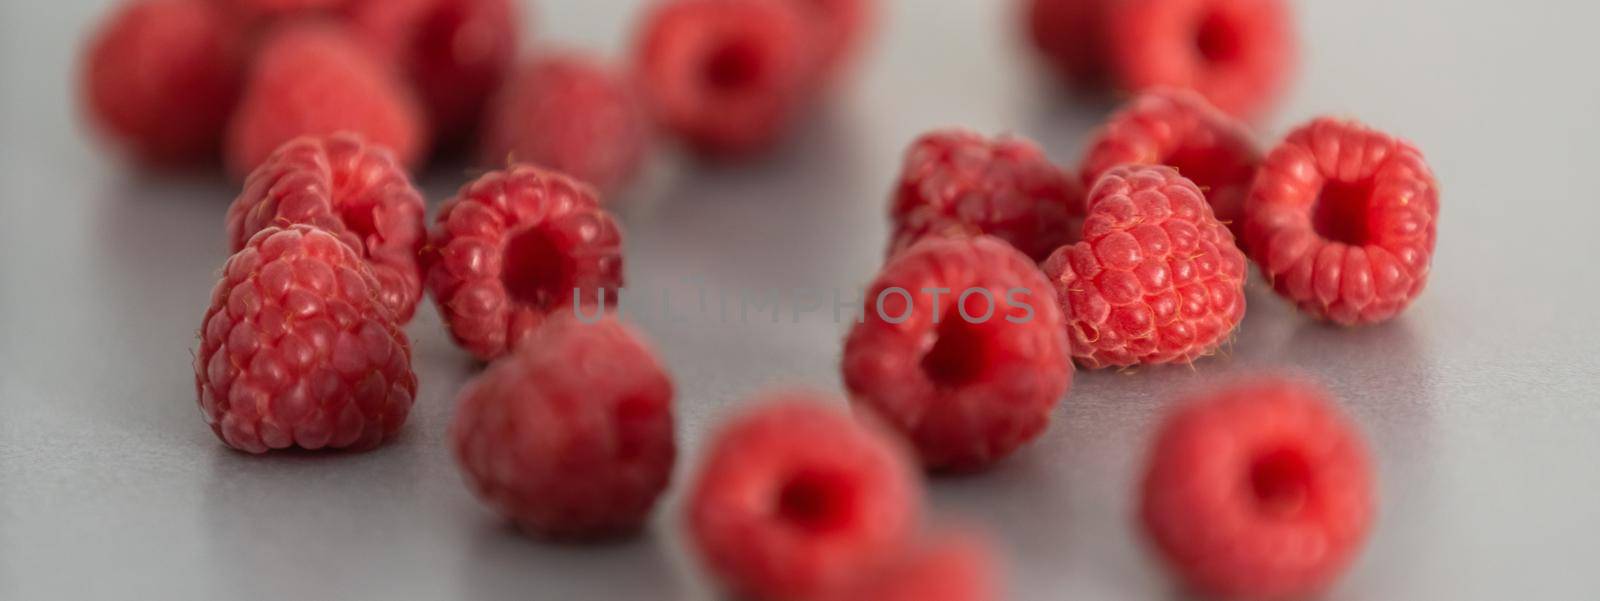 red Raspberry fruit on gray background chocolate by Andelov13